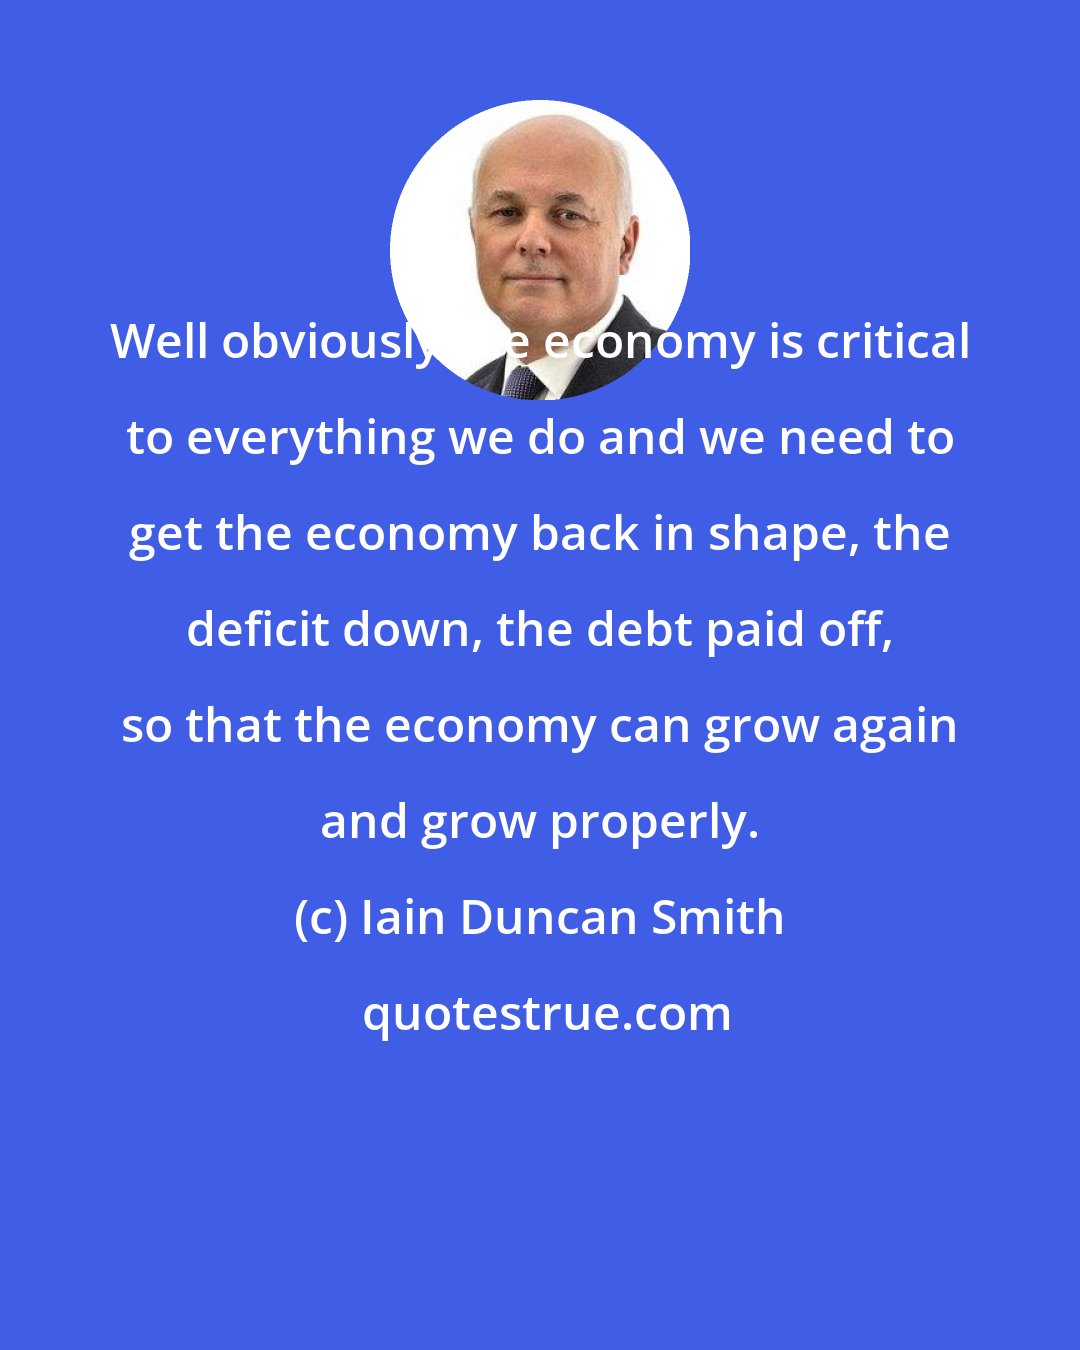 Iain Duncan Smith: Well obviously the economy is critical to everything we do and we need to get the economy back in shape, the deficit down, the debt paid off, so that the economy can grow again and grow properly.